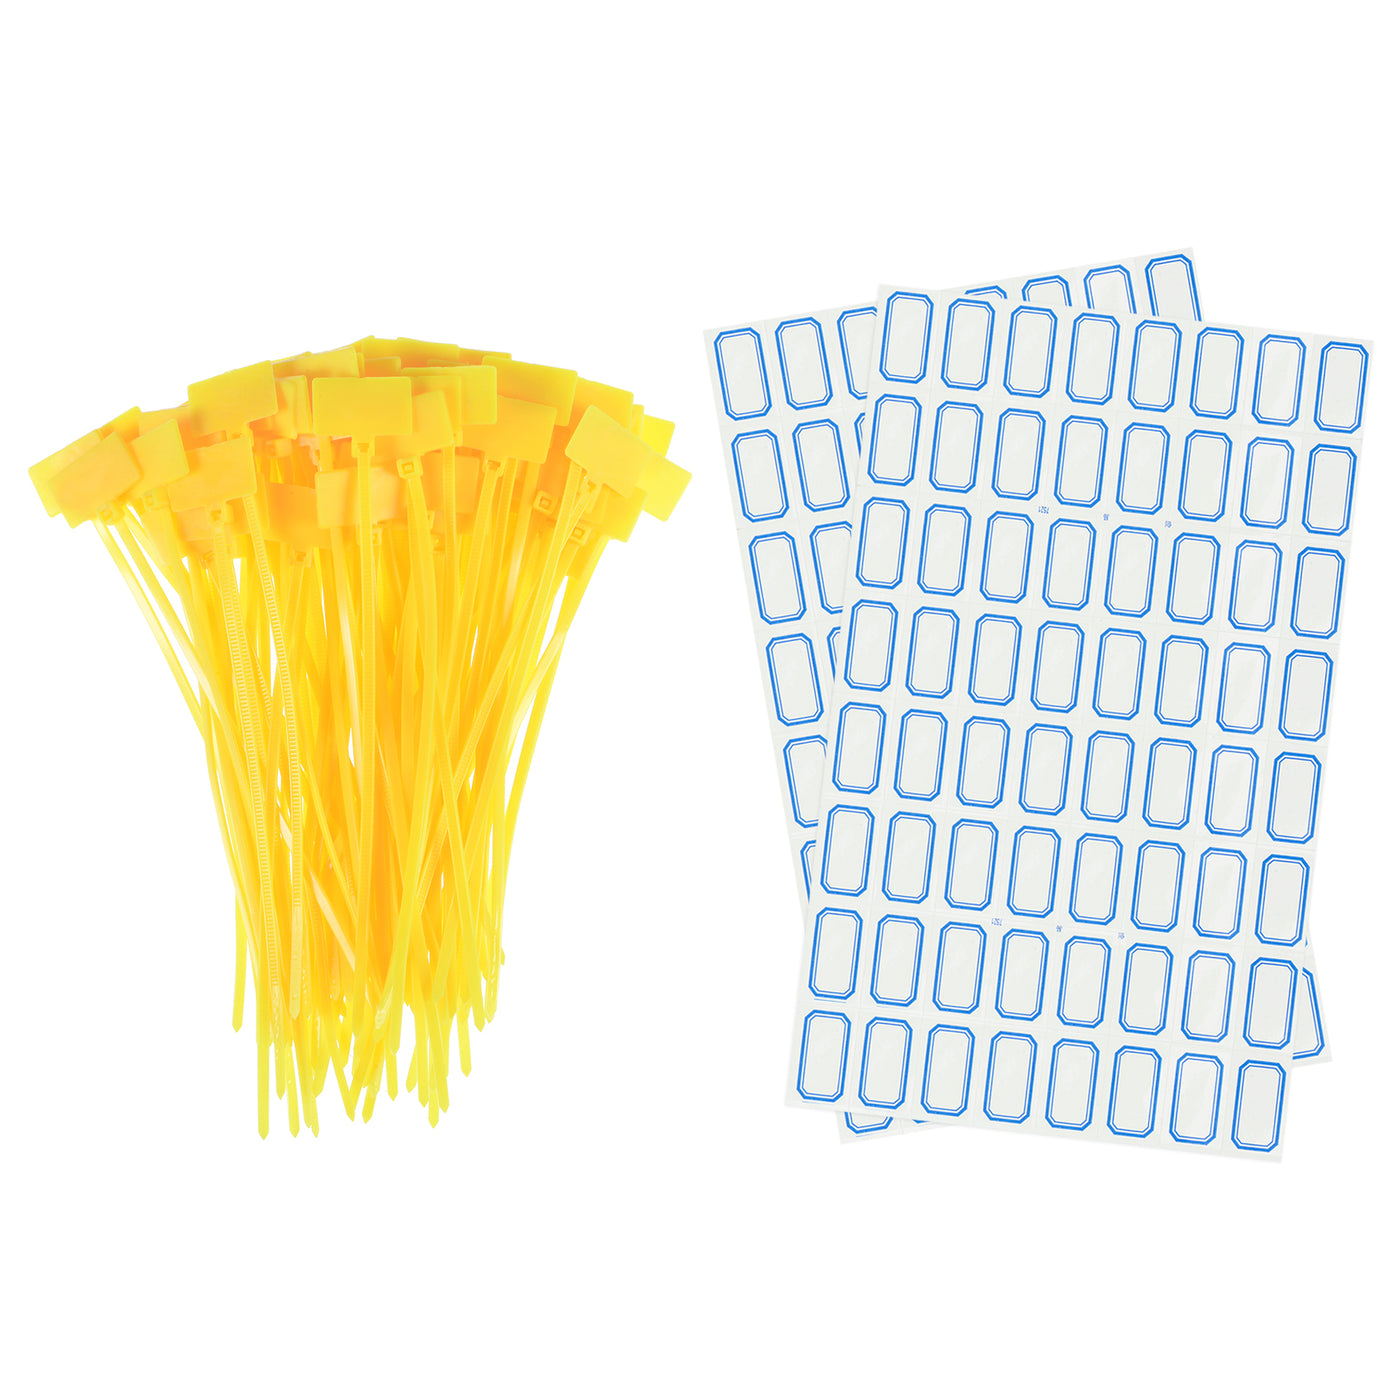 uxcell Uxcell 100pcs Nylon Cable Ties Tags Label Marker Self-Locking for Marking Organizing Yellow